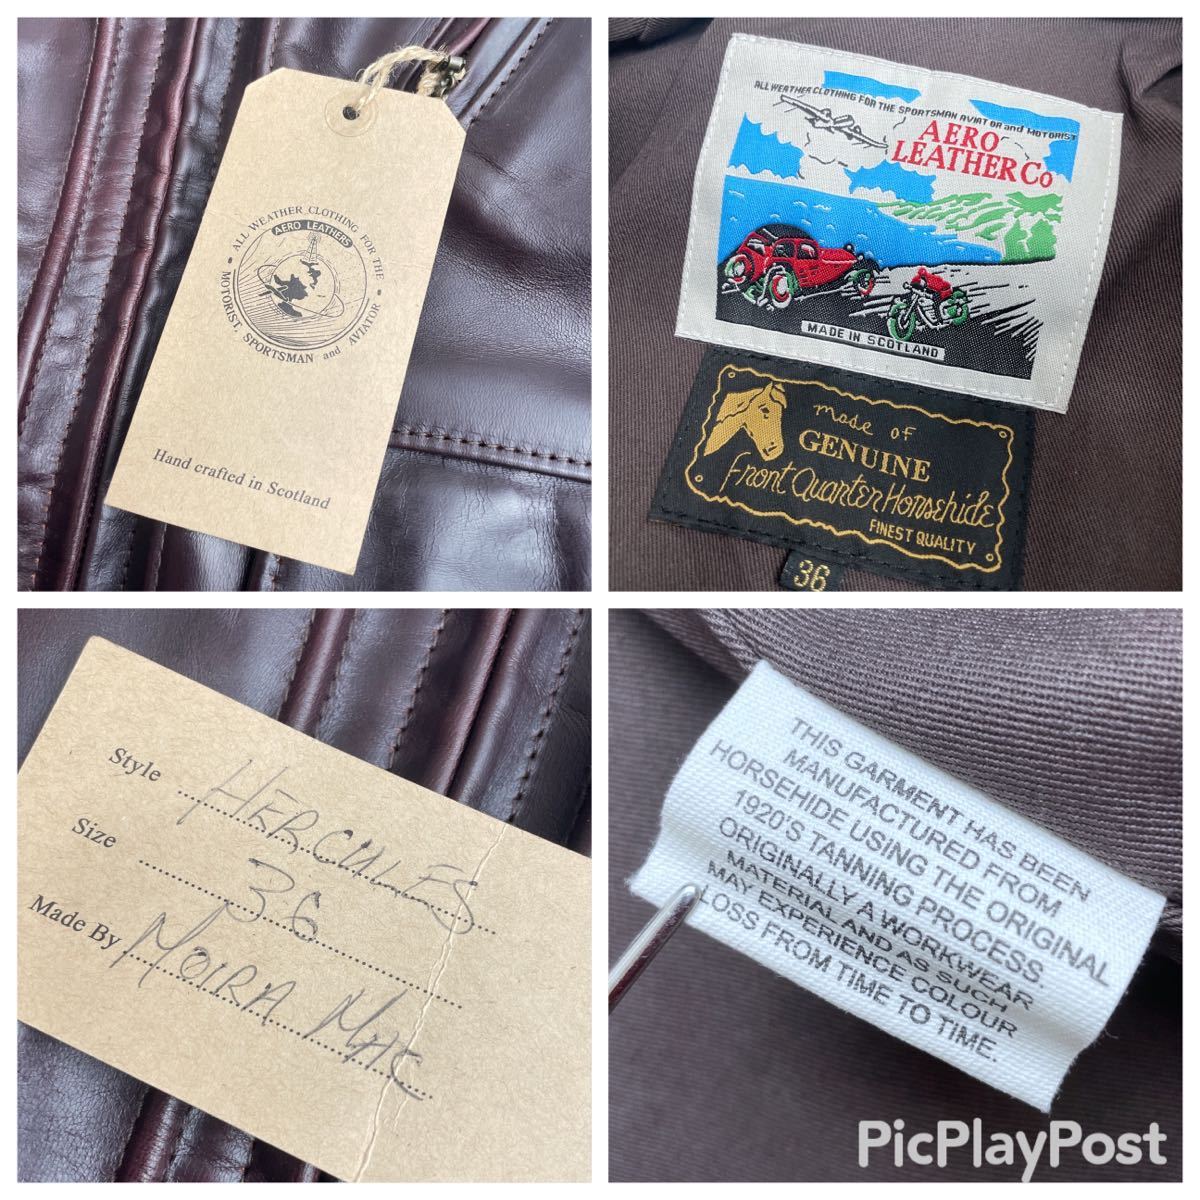  unused goods * tag attaching!*AERO LEATHER aero leather * Scotland made Hercules Horse Hyde leather jacket men's size 36 horse leather 